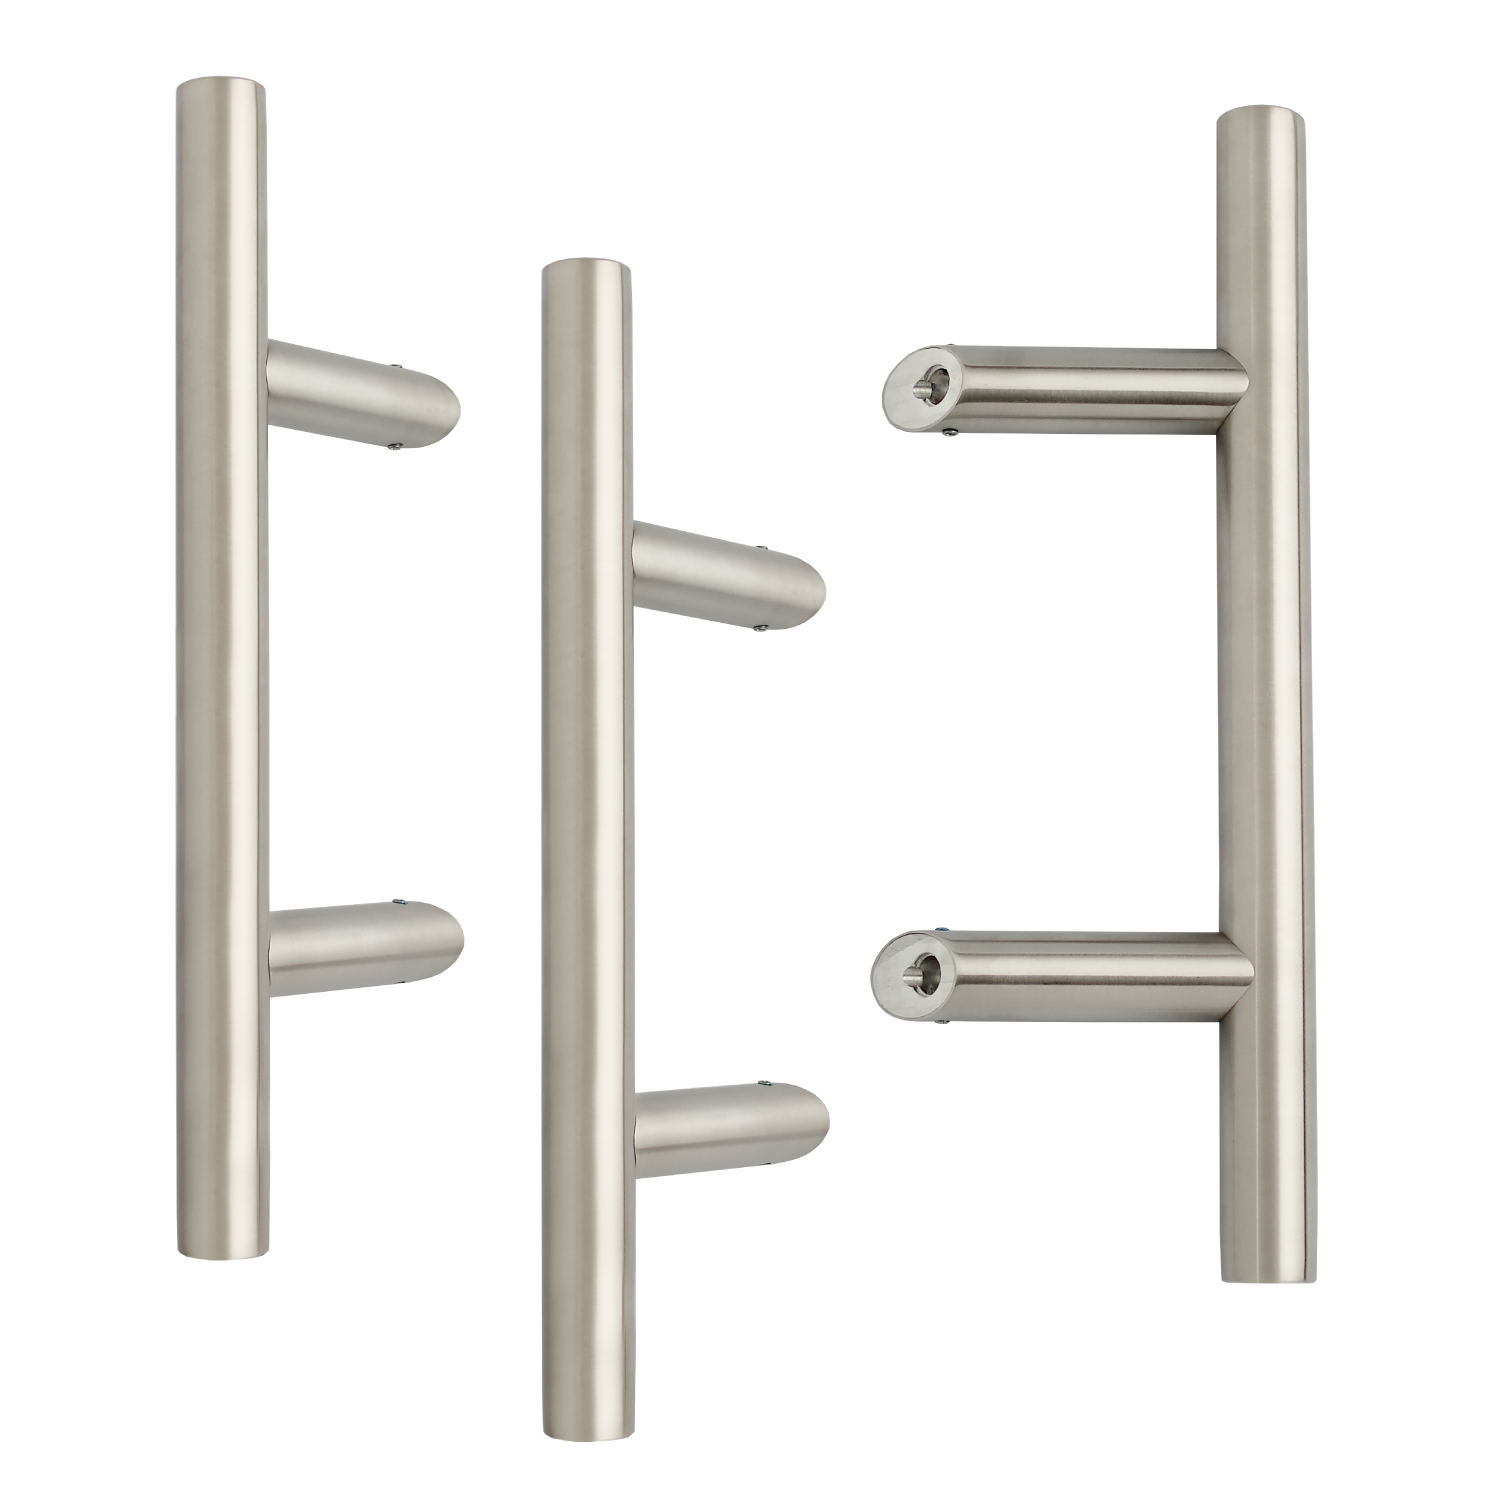 316 Stainless Steel Offset Bar Door Handle, Back to Back Fix